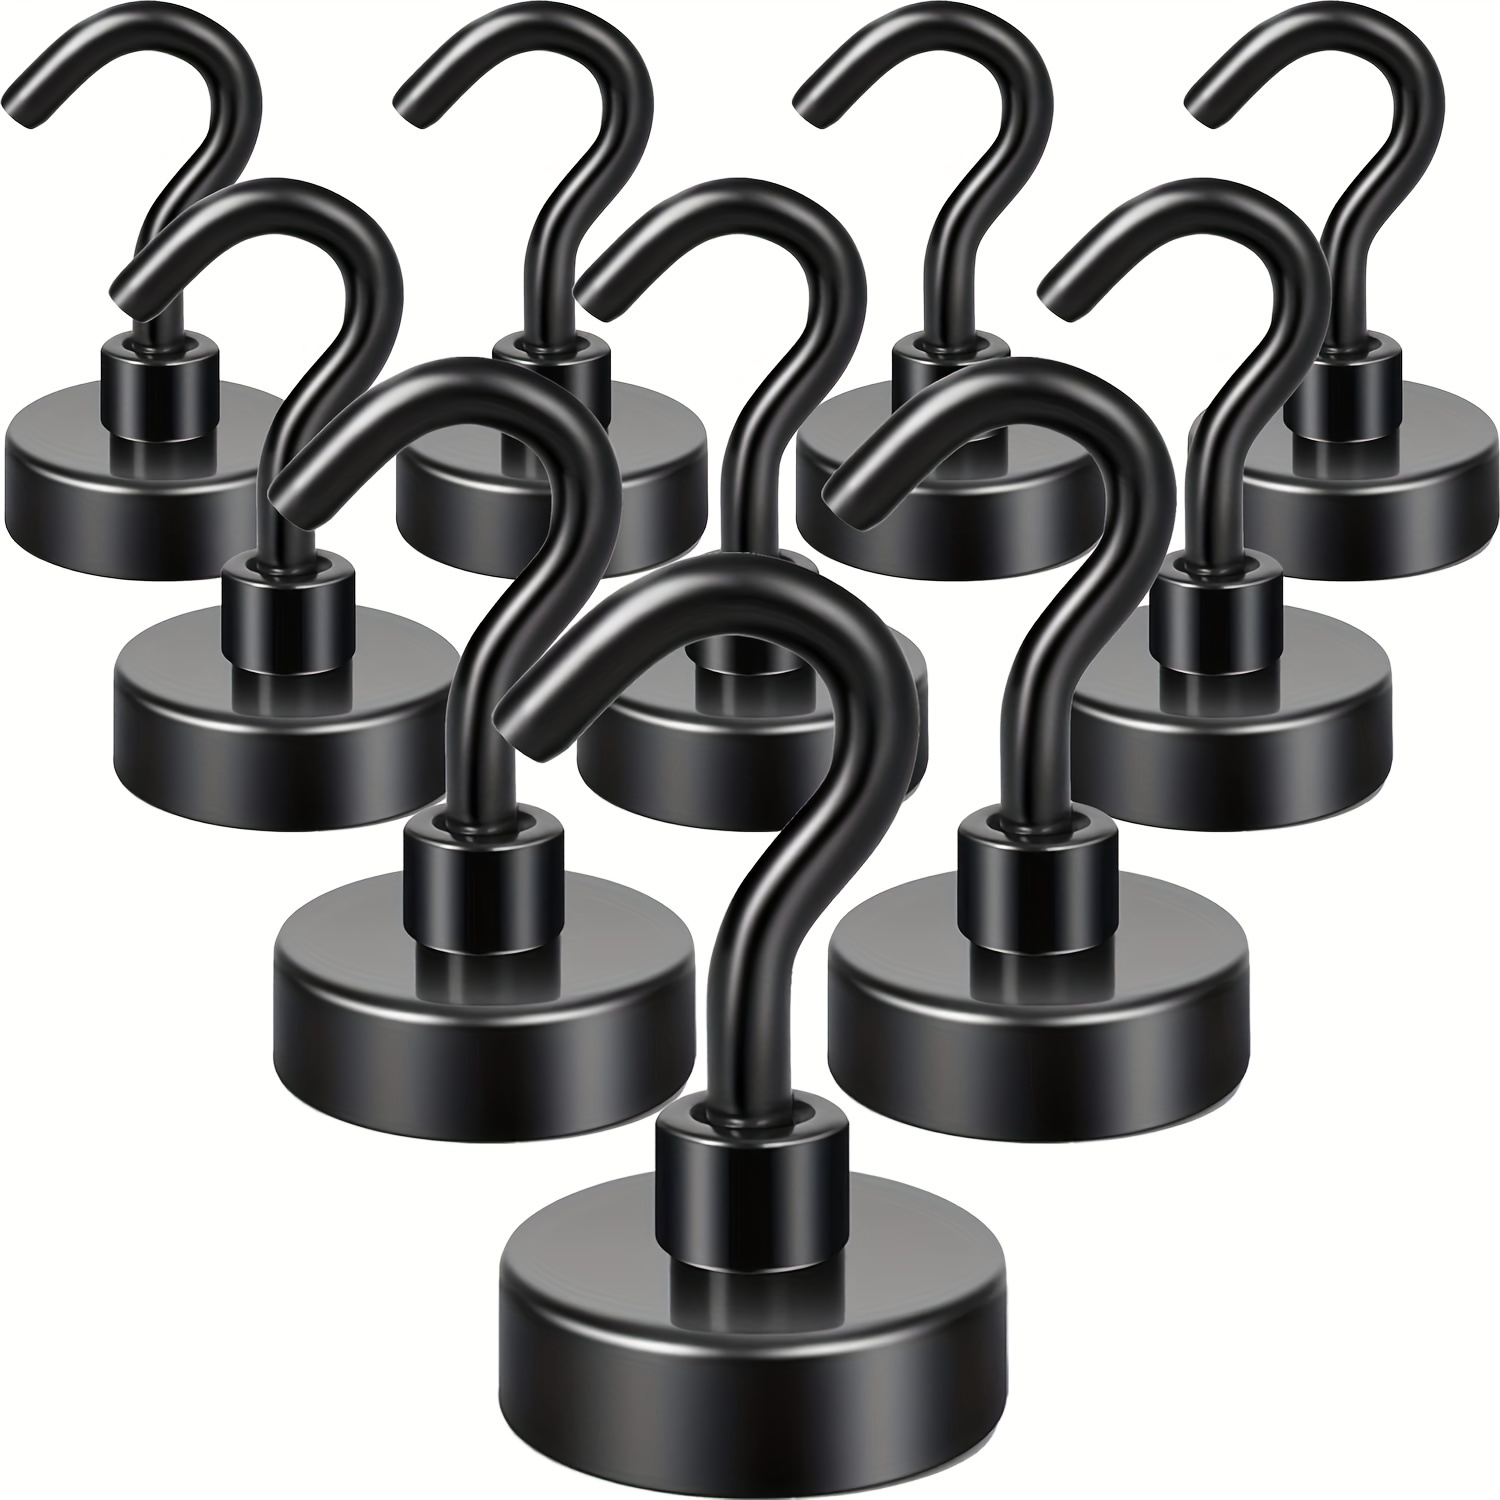 

Black Magnetic Hooks, 40 Lb Heavy Duty Strong Magnet With Hooks, Strong Rare Earth Neodymium Magnet Hooks For Hanging, Magnetic Hanger For Curtain, Home, Kitchen, Workplace, 18 Packs